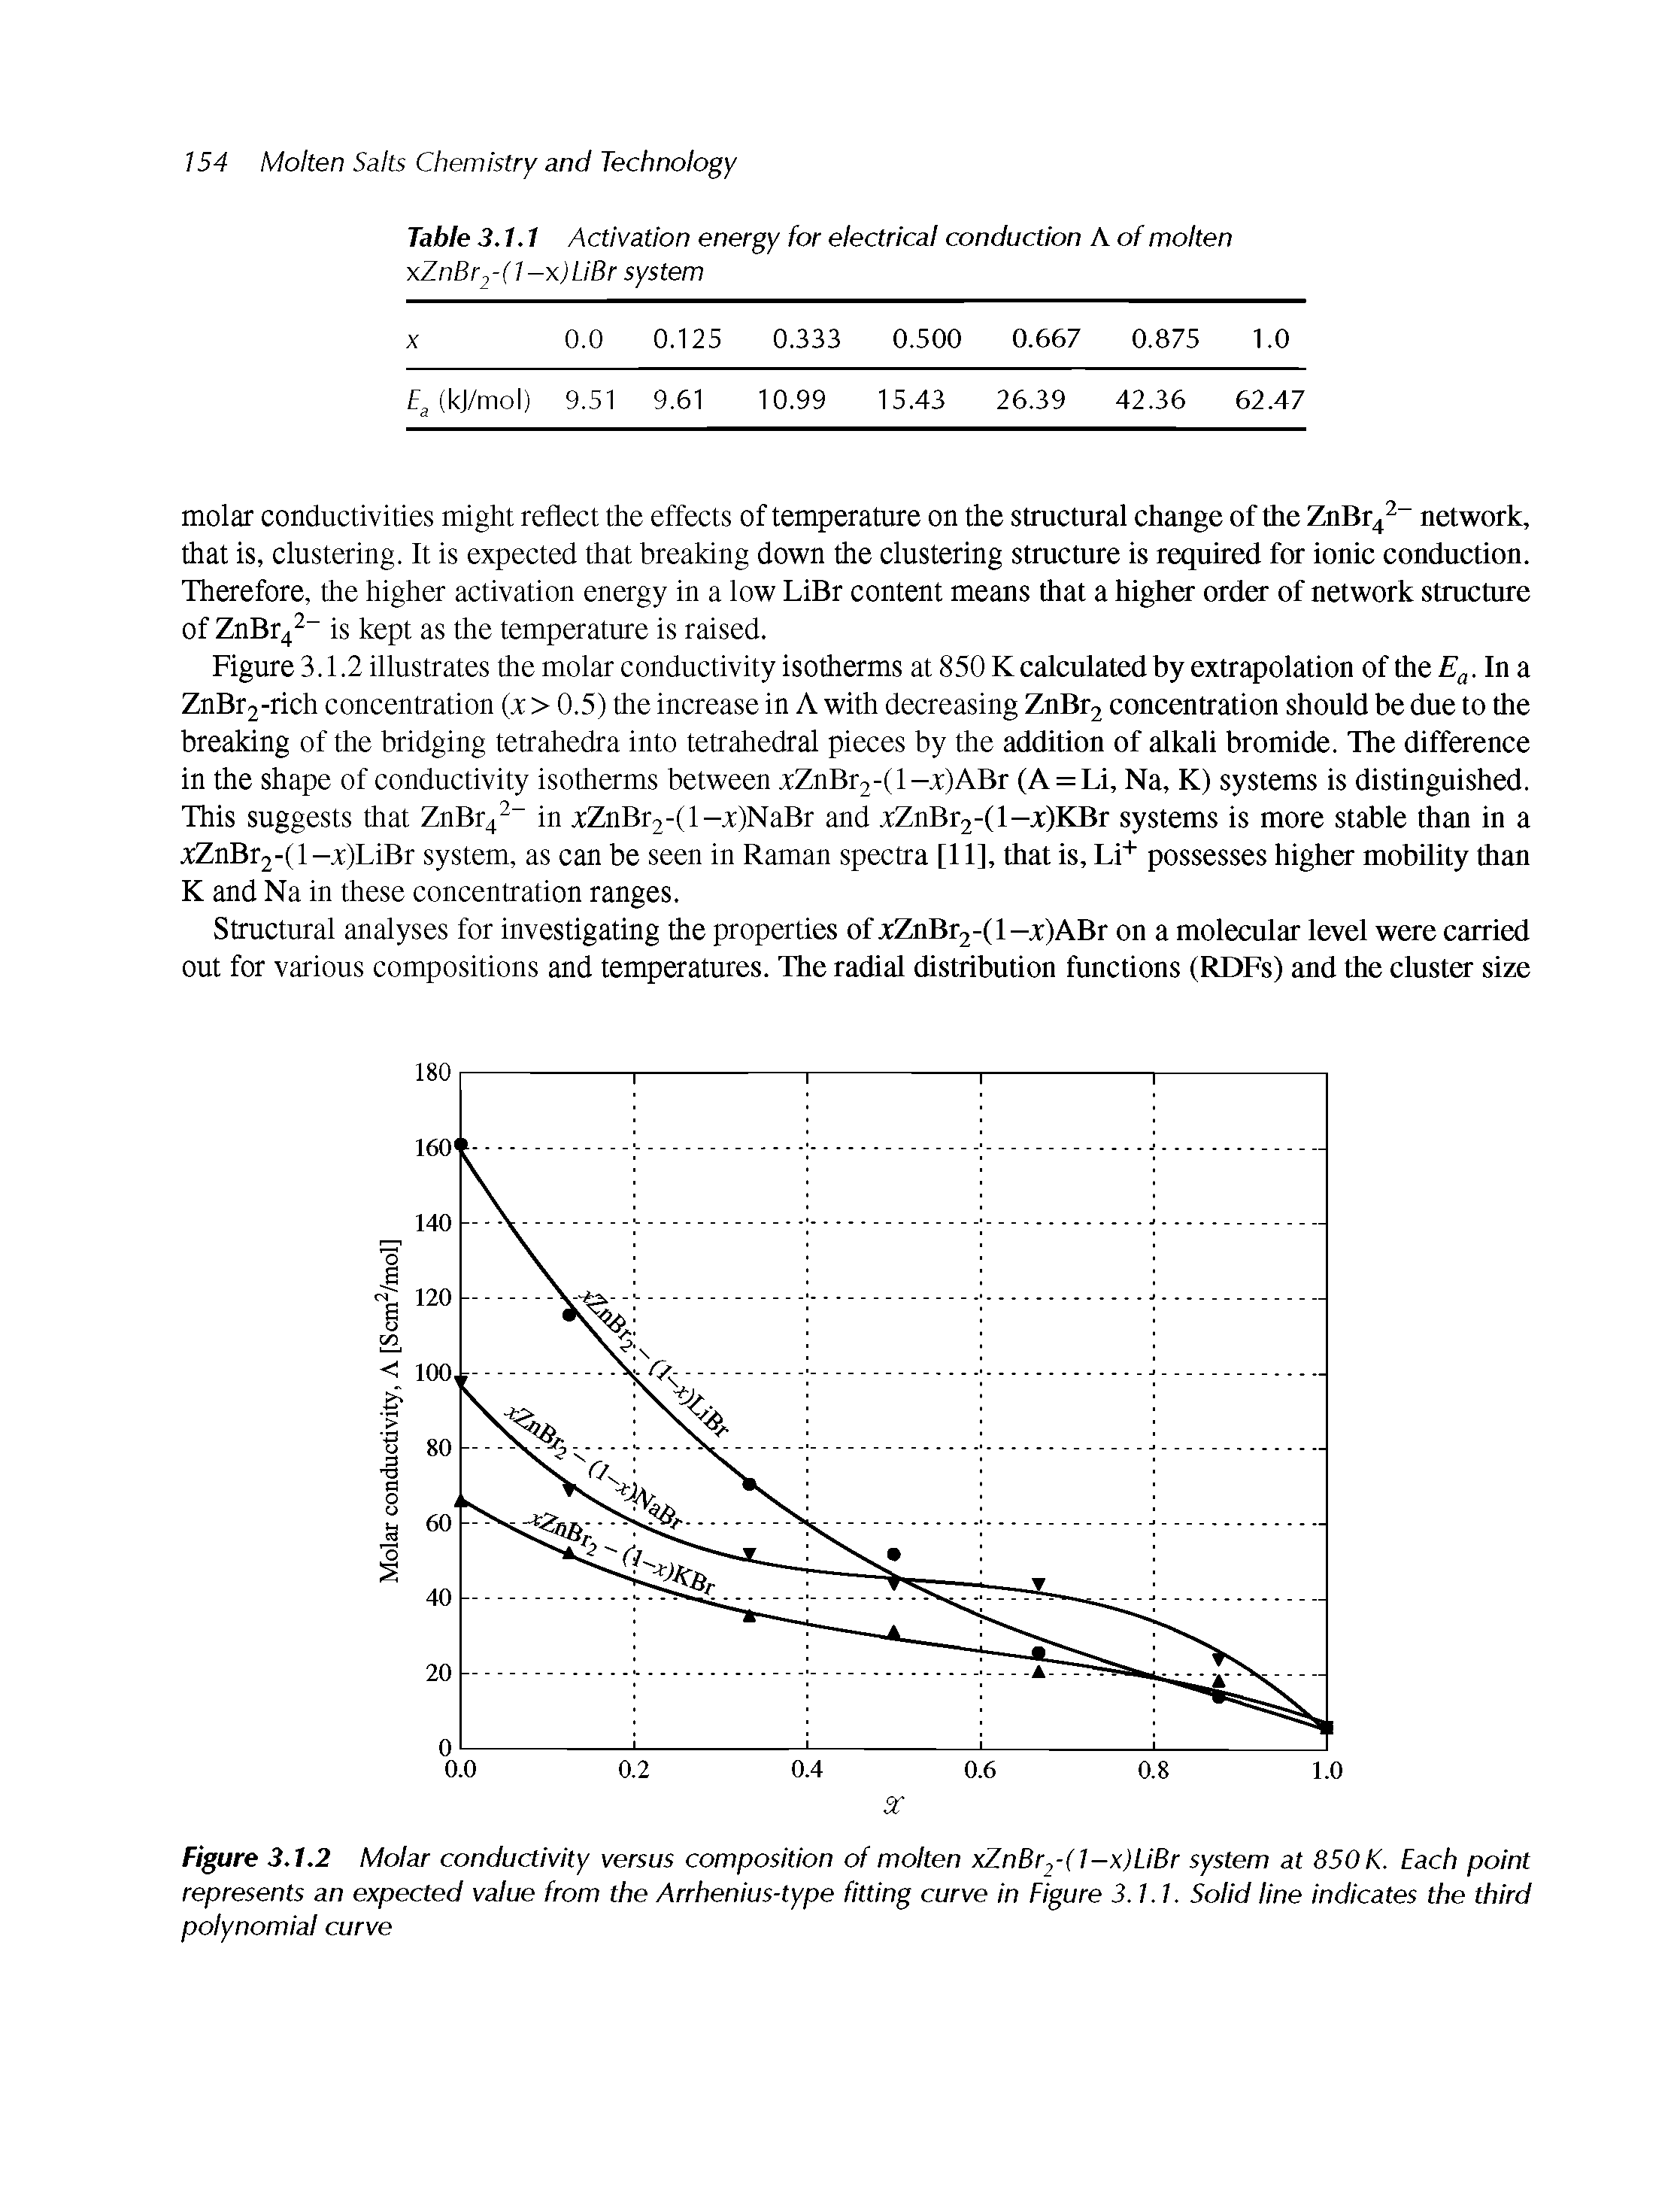 Figure 3.1.2 Molar conductivity versus composition of molten xZnBr2-(1-x)LiBr system at 850 K. Each point represents an expected value from the Arrhenius-type fitting curve in Figure 3.1.1. Solid line indicates the third polynomial curve...